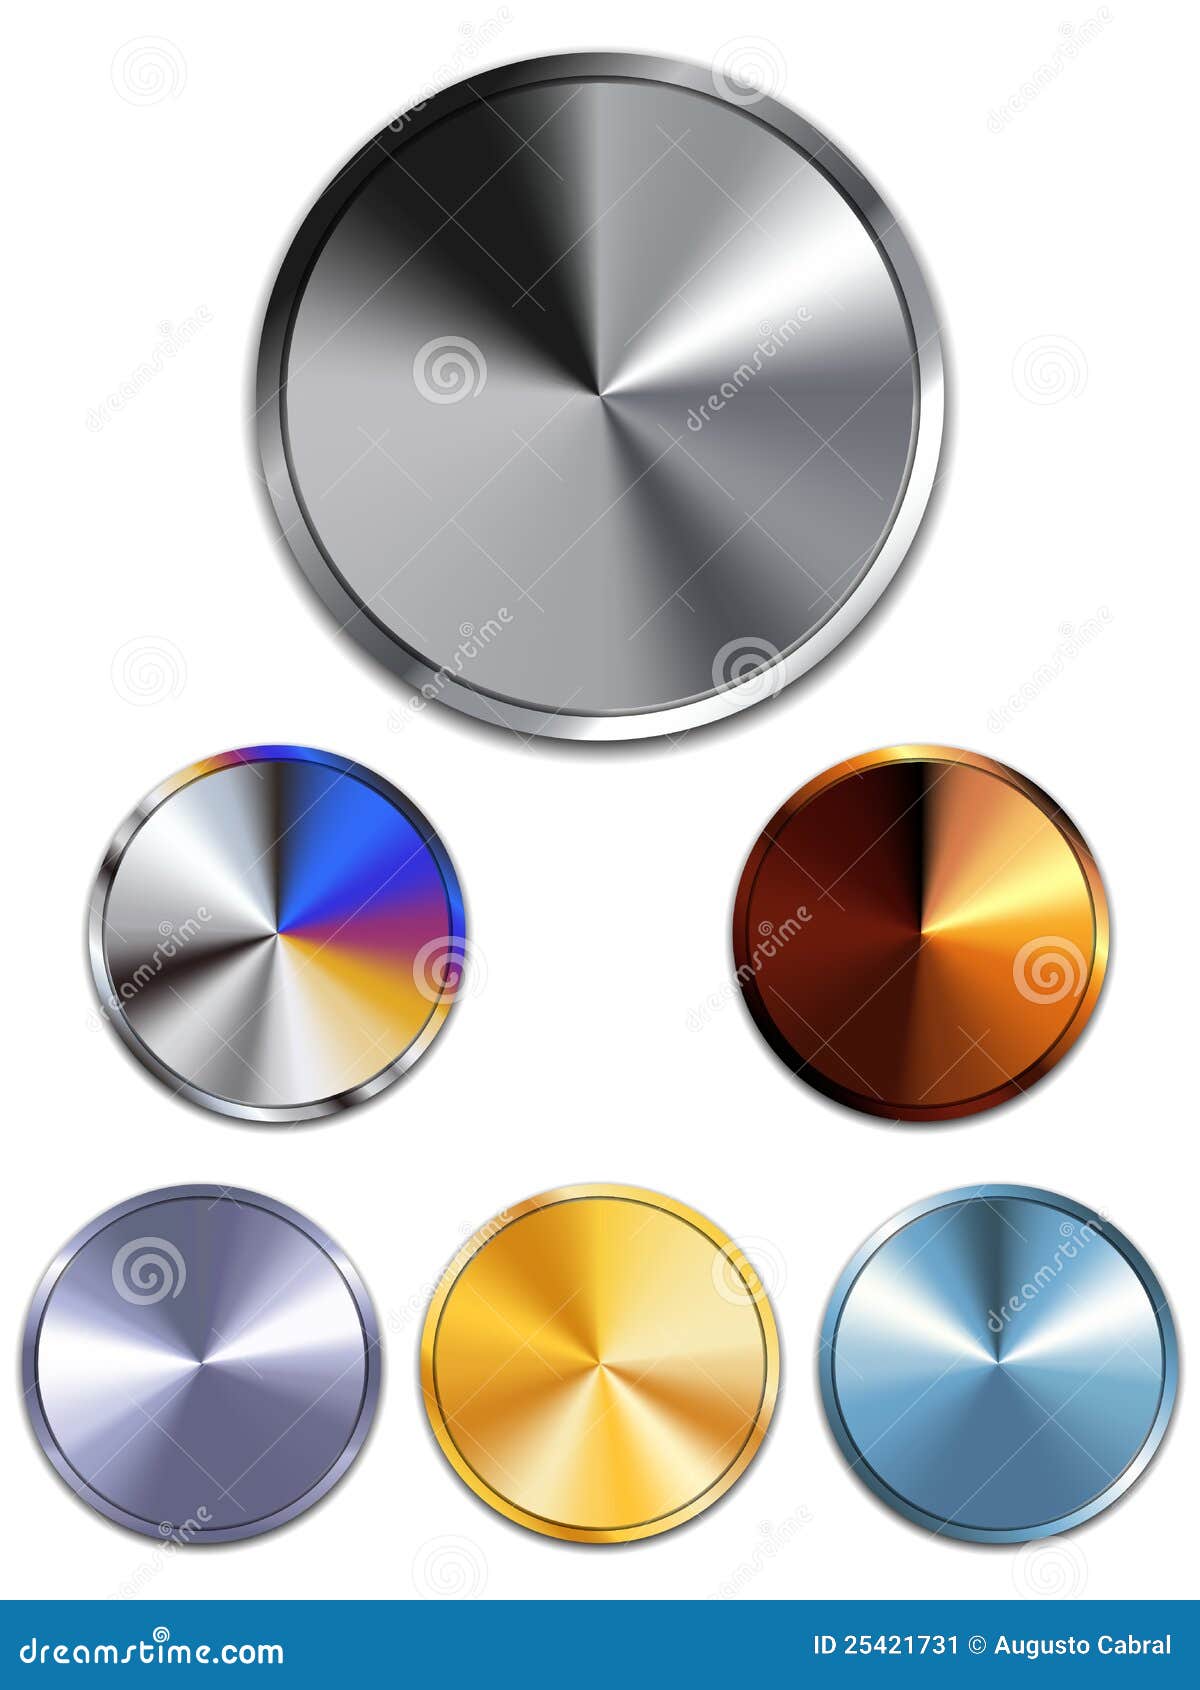 metal buttons. silver, gold, copper